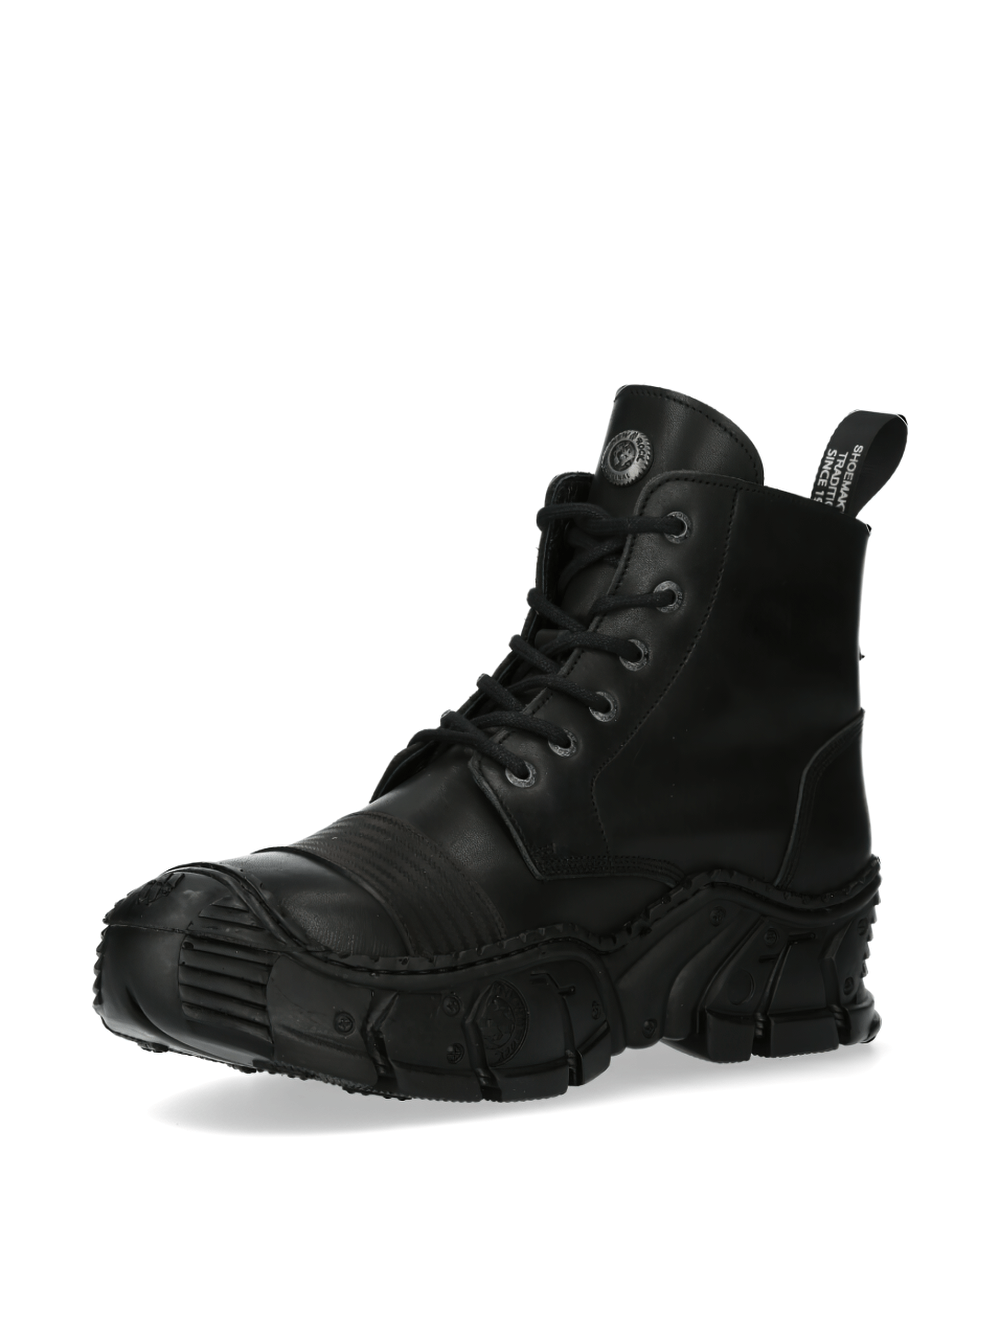 NEW ROCK Unisex Black Lace-Up Ankle Boots with Metal Detail